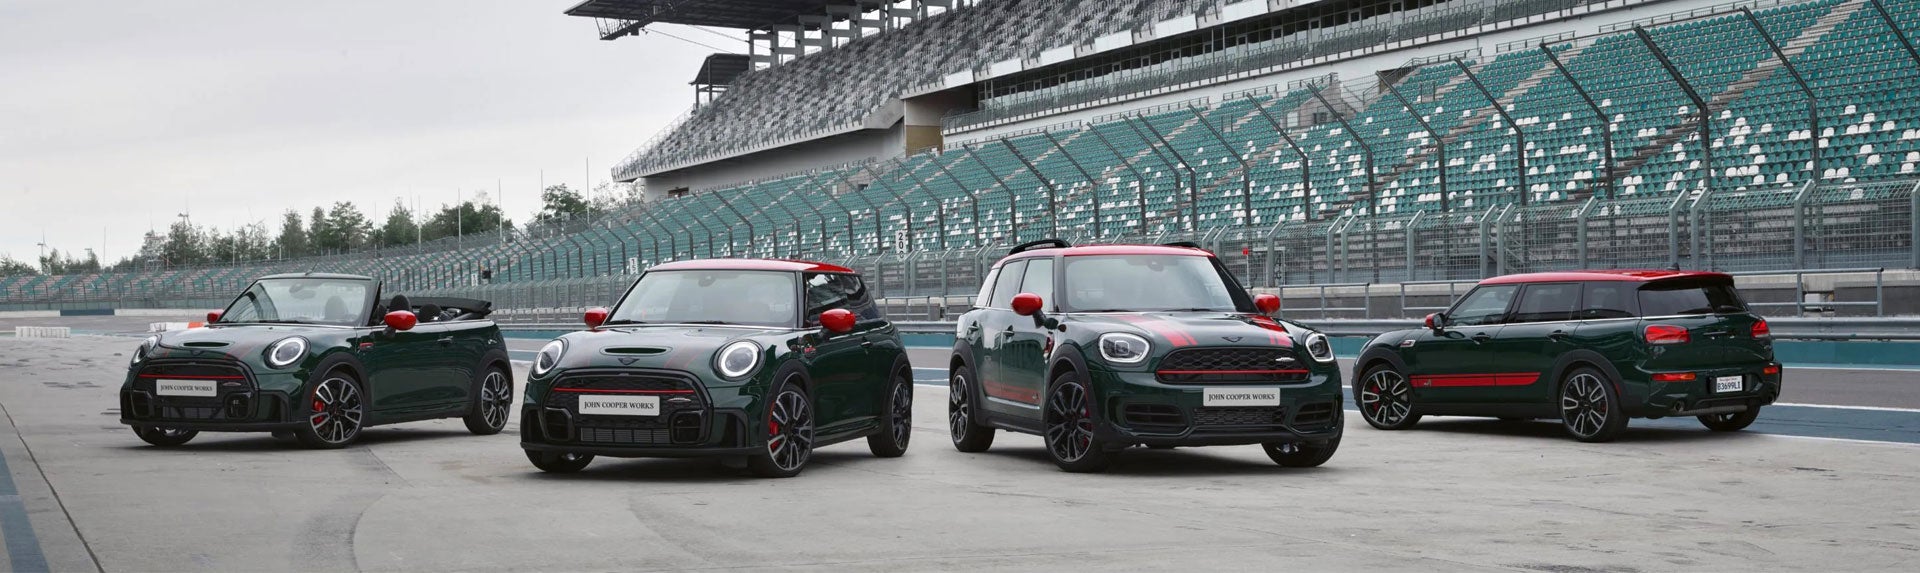 Family of four MINI John Cooper Works models parked on a race track. | MINI of Madison in Madison WI